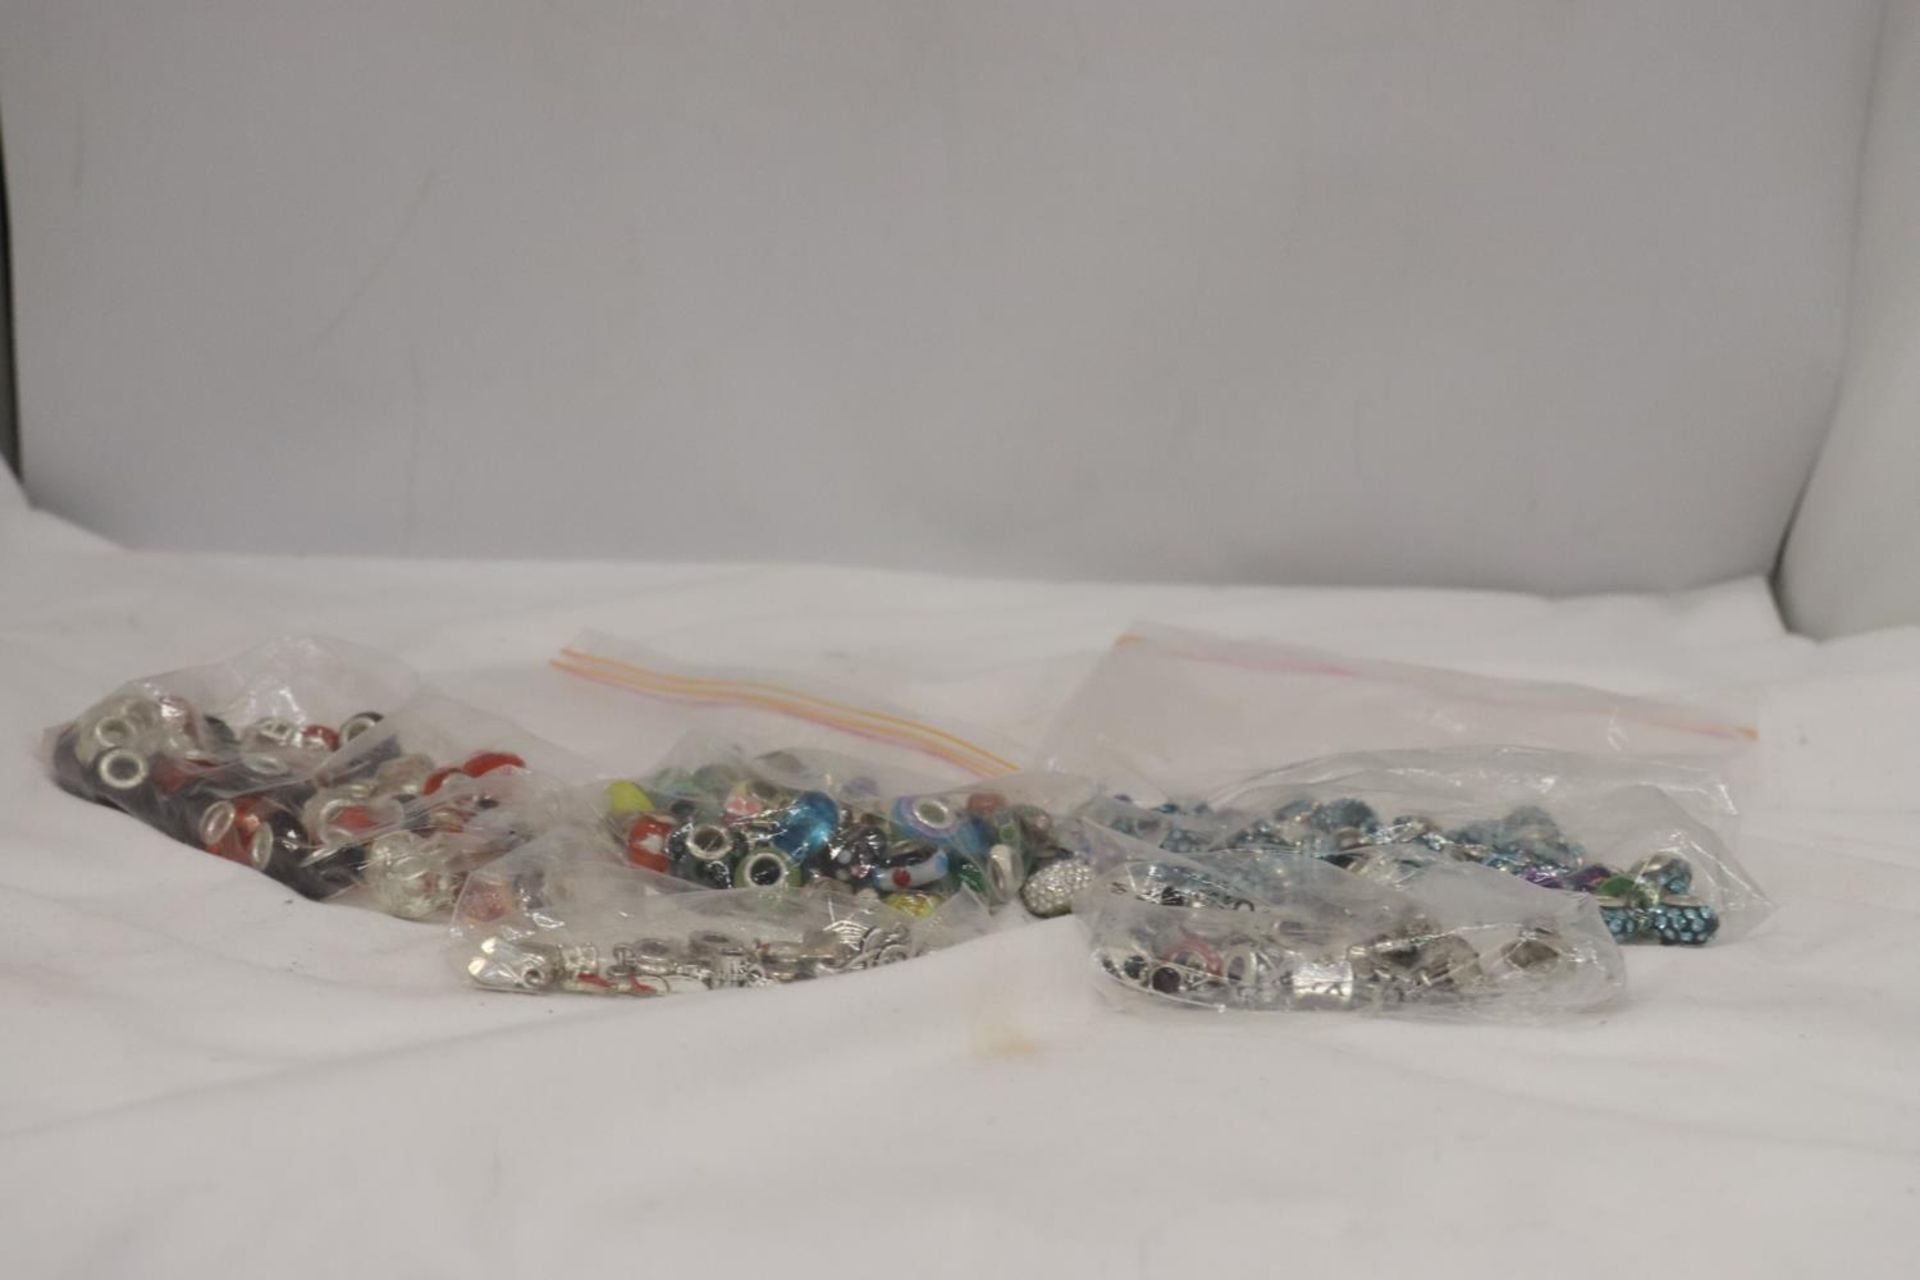 A LARGE QUANTITY OF PANDORA STYLE BEADS, SOME MARKED 925 - Image 7 of 8